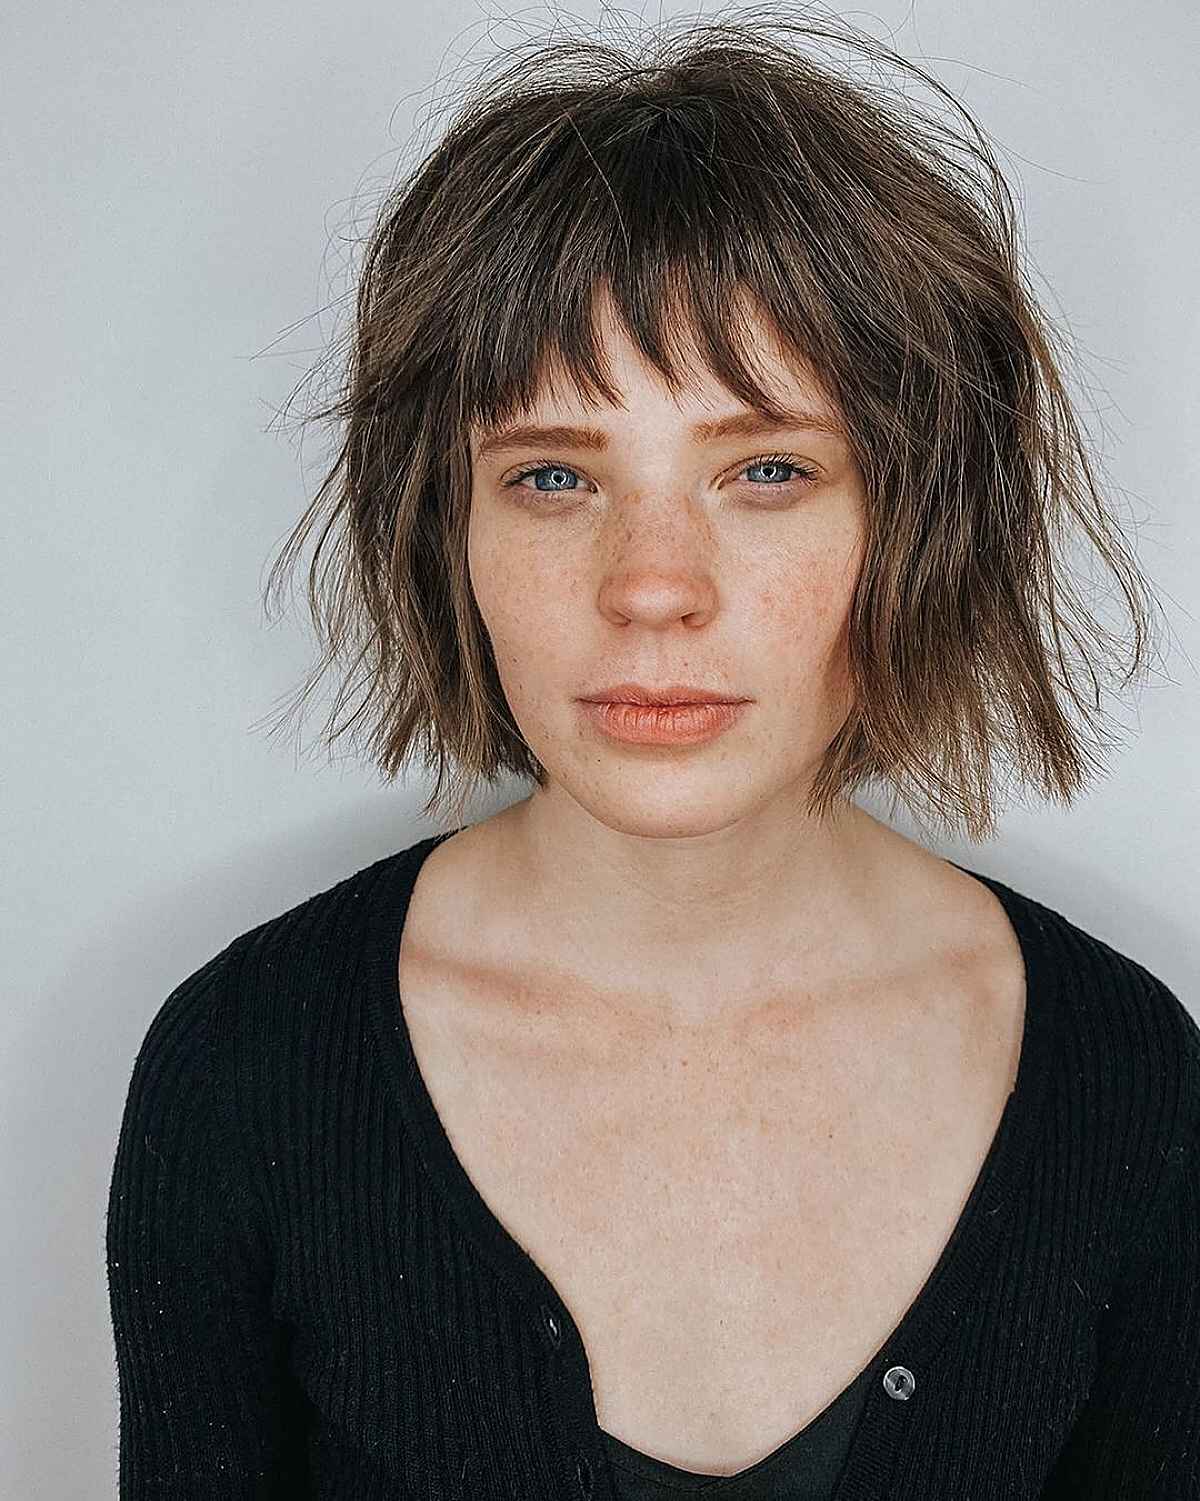 25+ Chic Short Layered Bob with Bangs for an Eye-Catching Crop